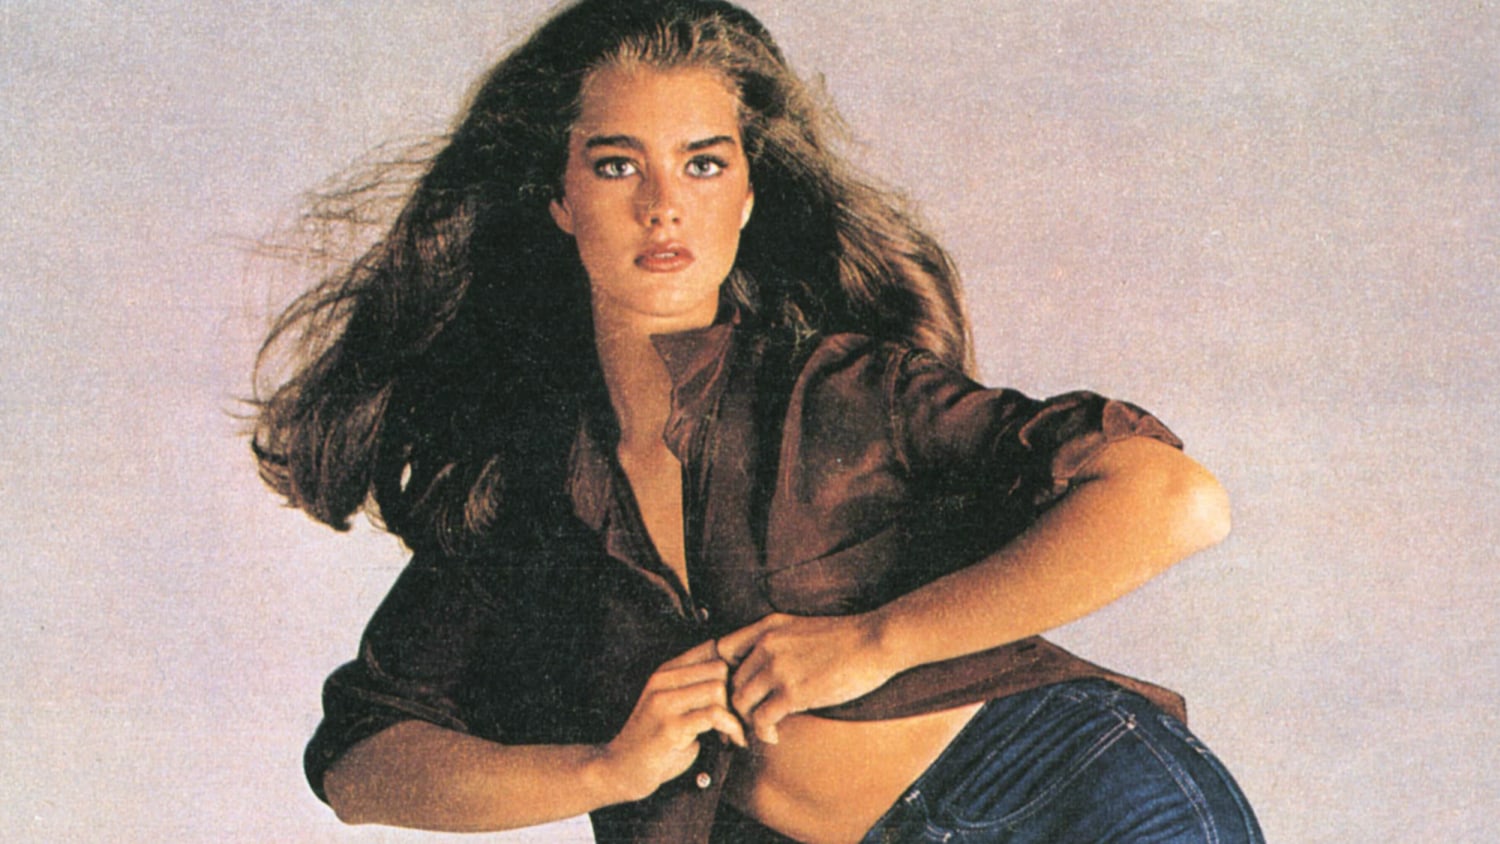 Brooke Shields Models Calvin Klein Lingerie 37 Years After Iconic Jeans ...